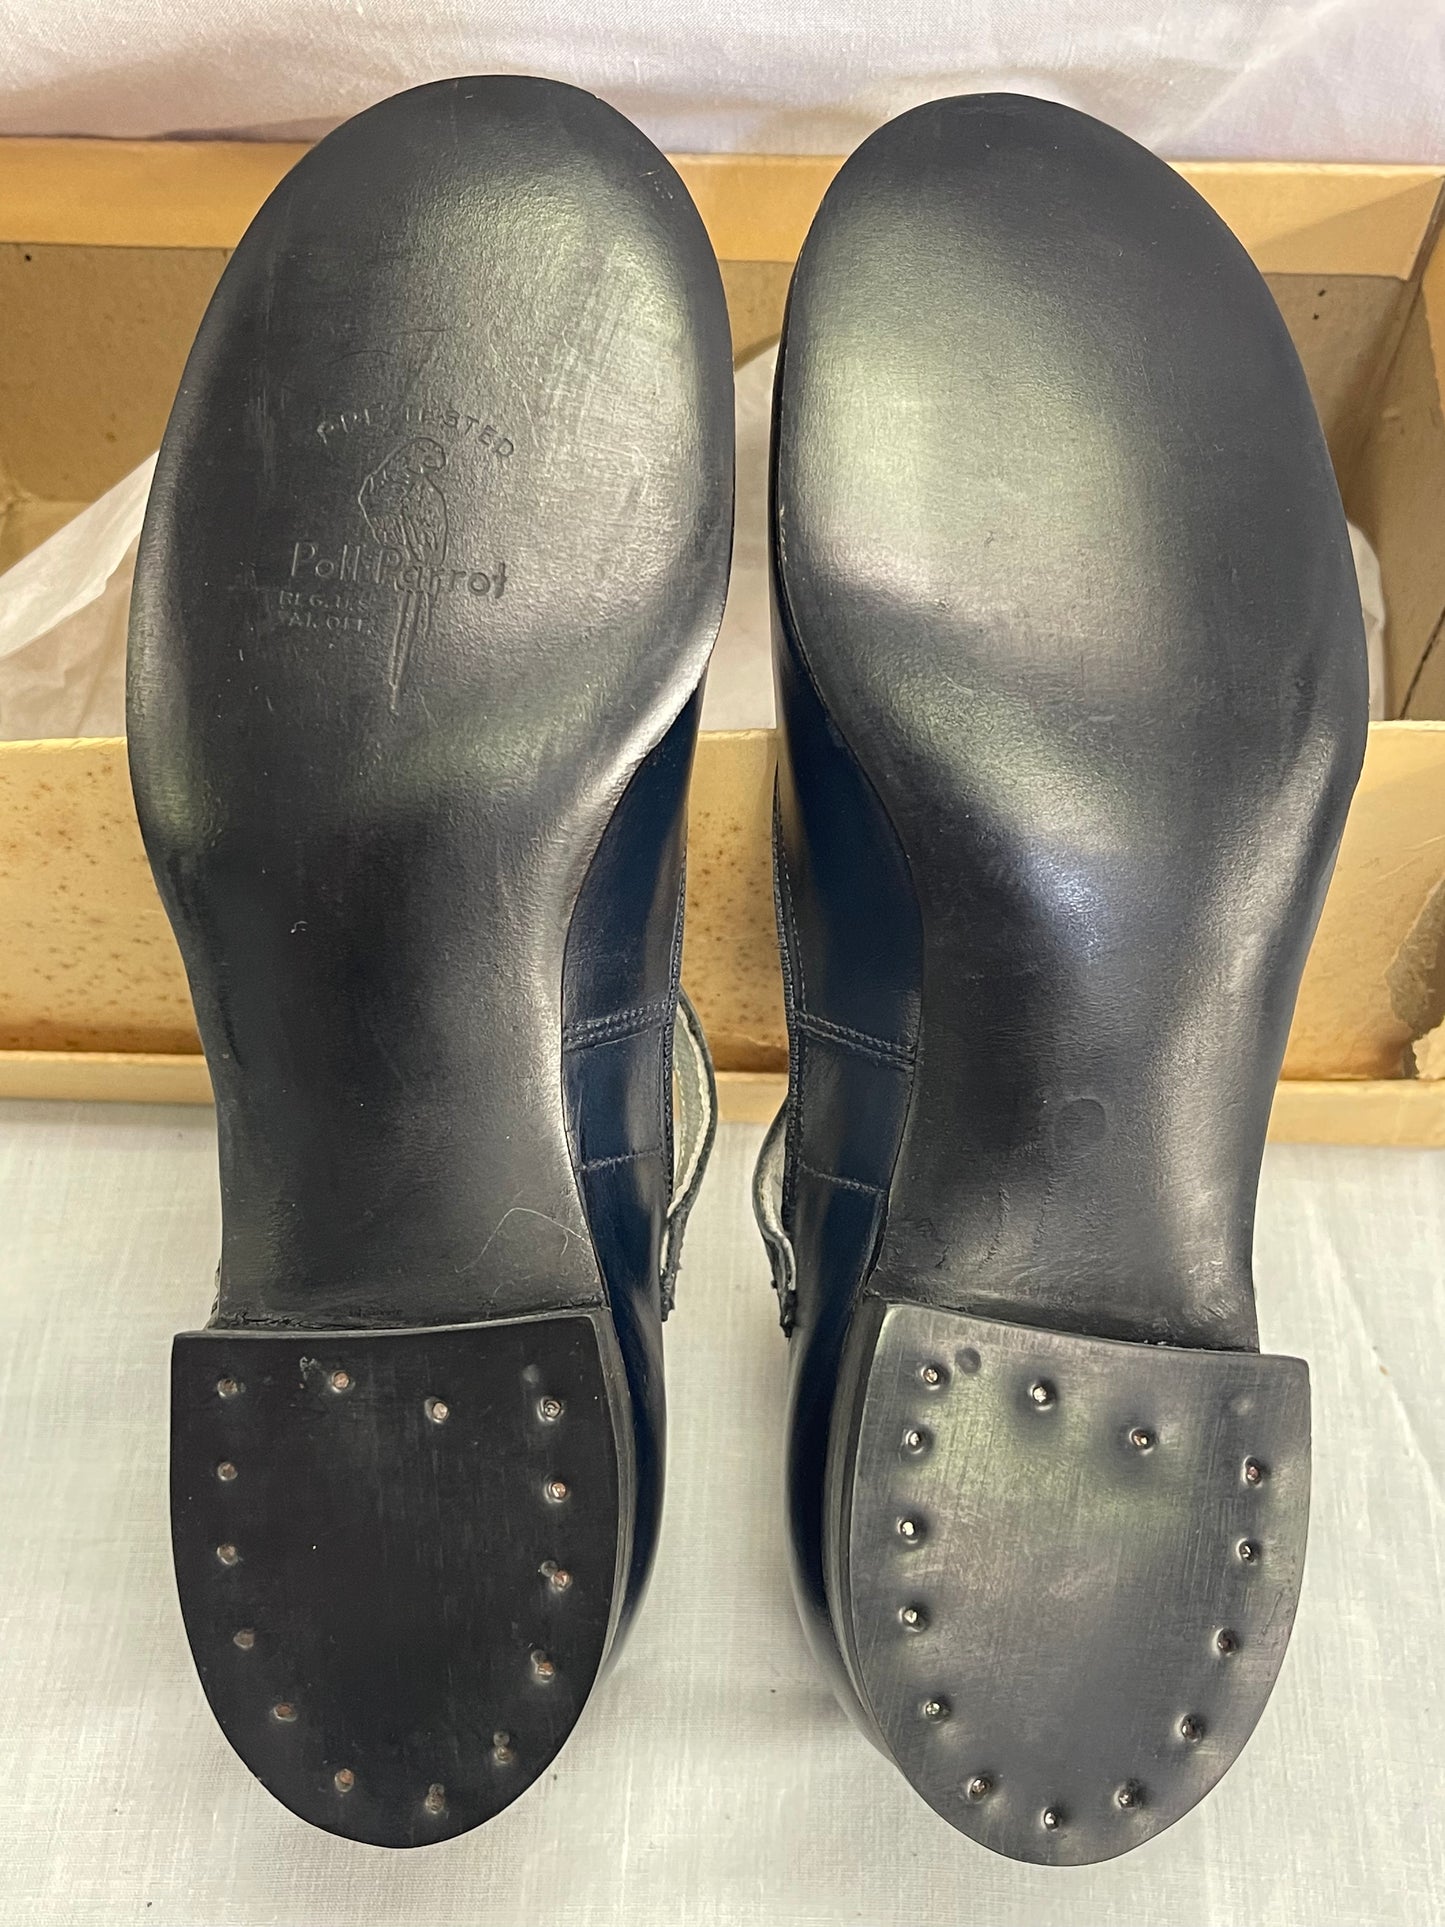 NOS Poll-Parrot Girl’s Navy Leather Shoes